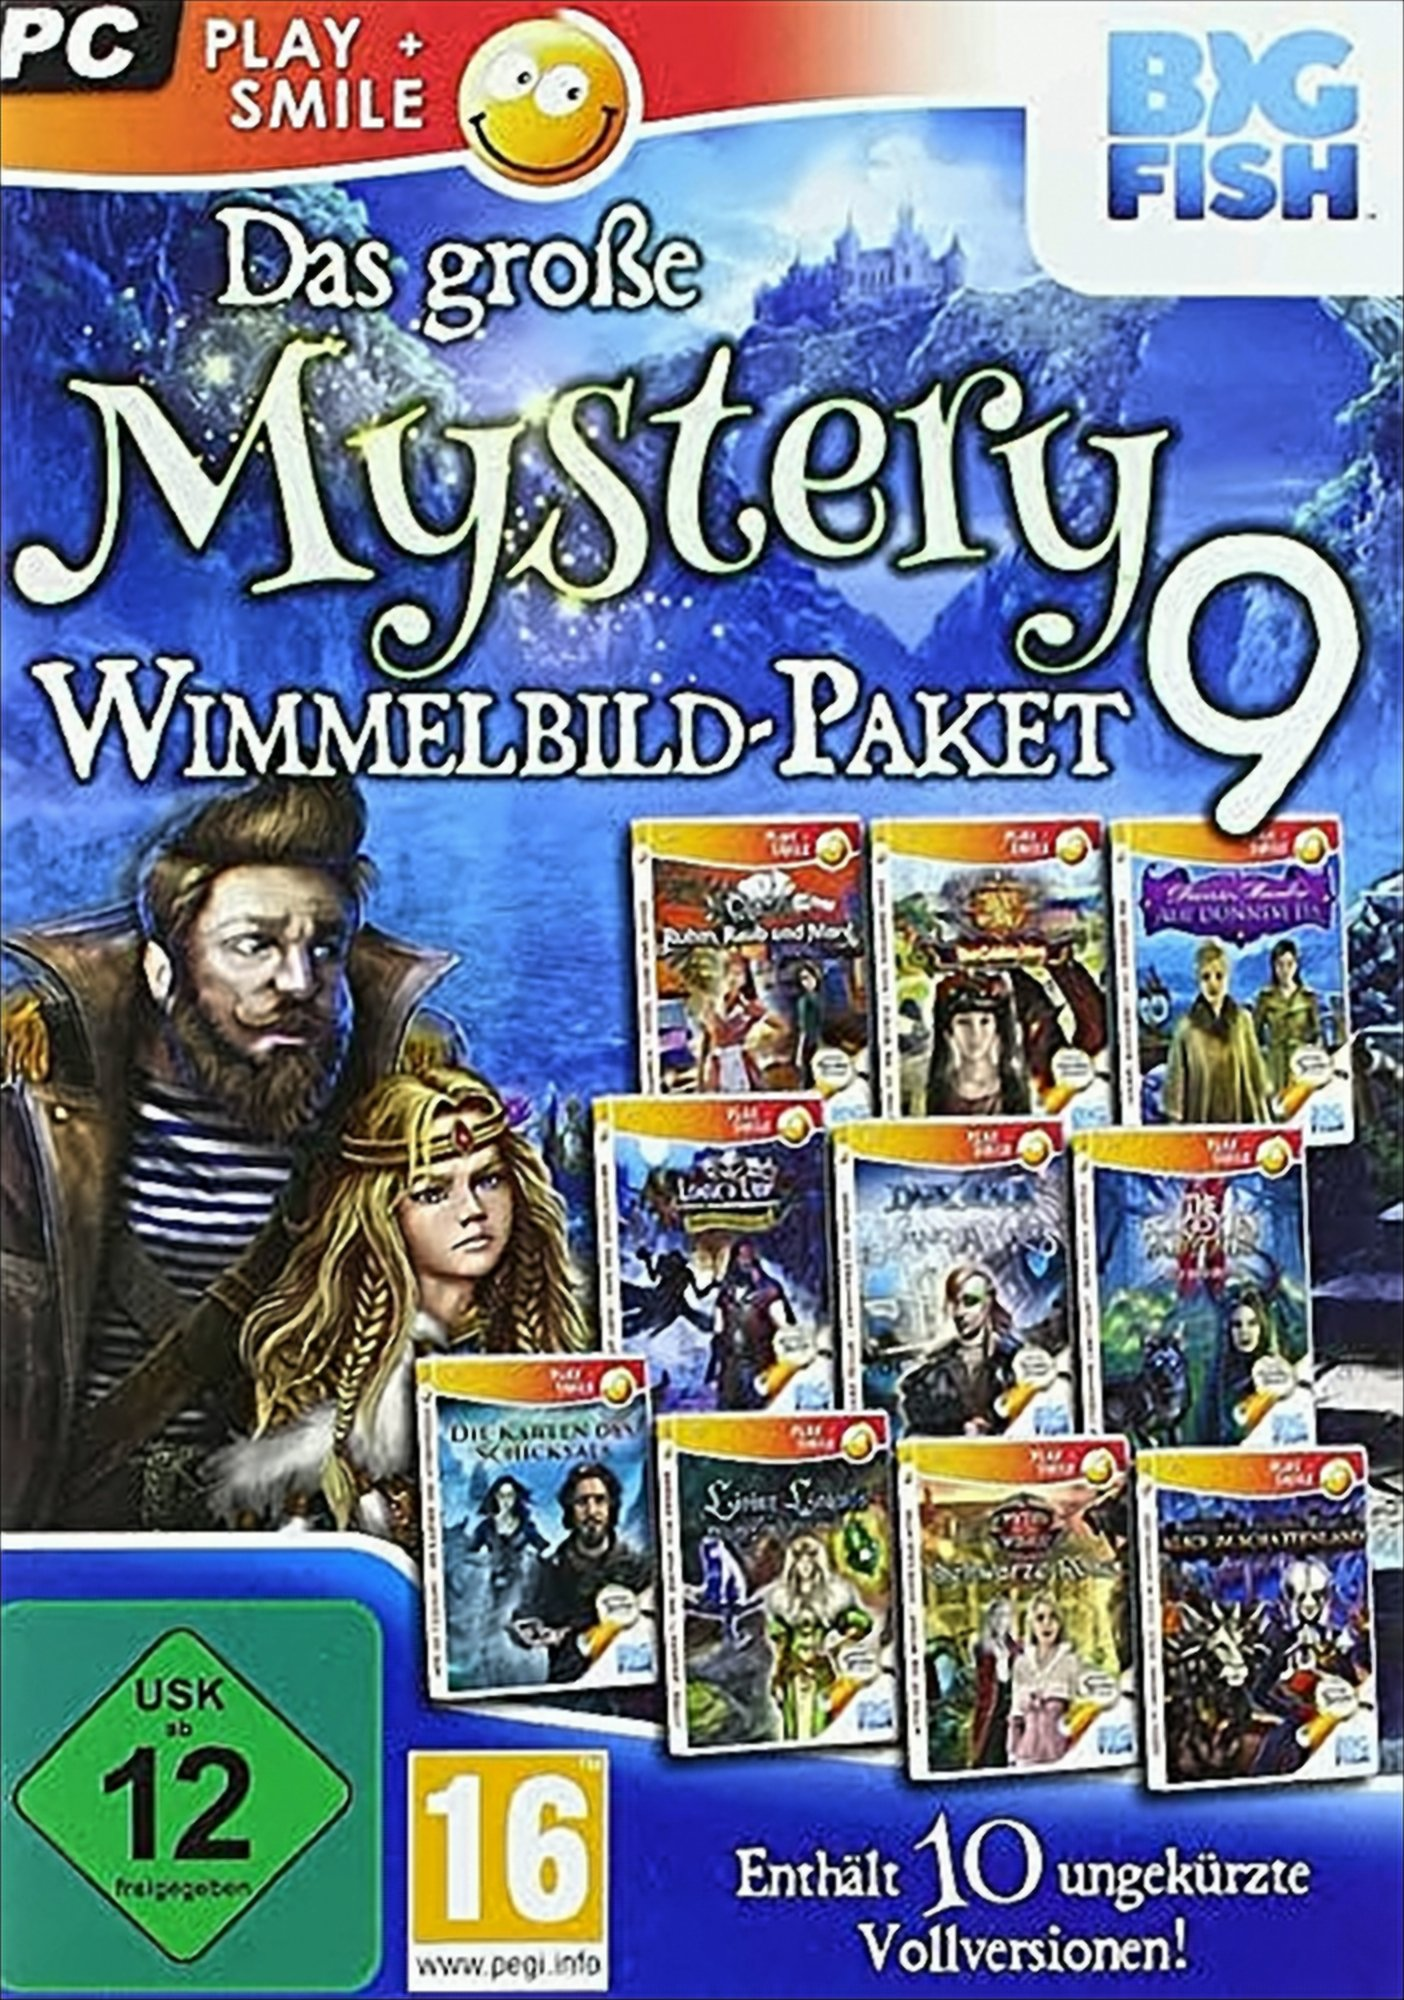 Große Mystery PC - PLAY+SMILE Wimmelbildpaket [PC] 9